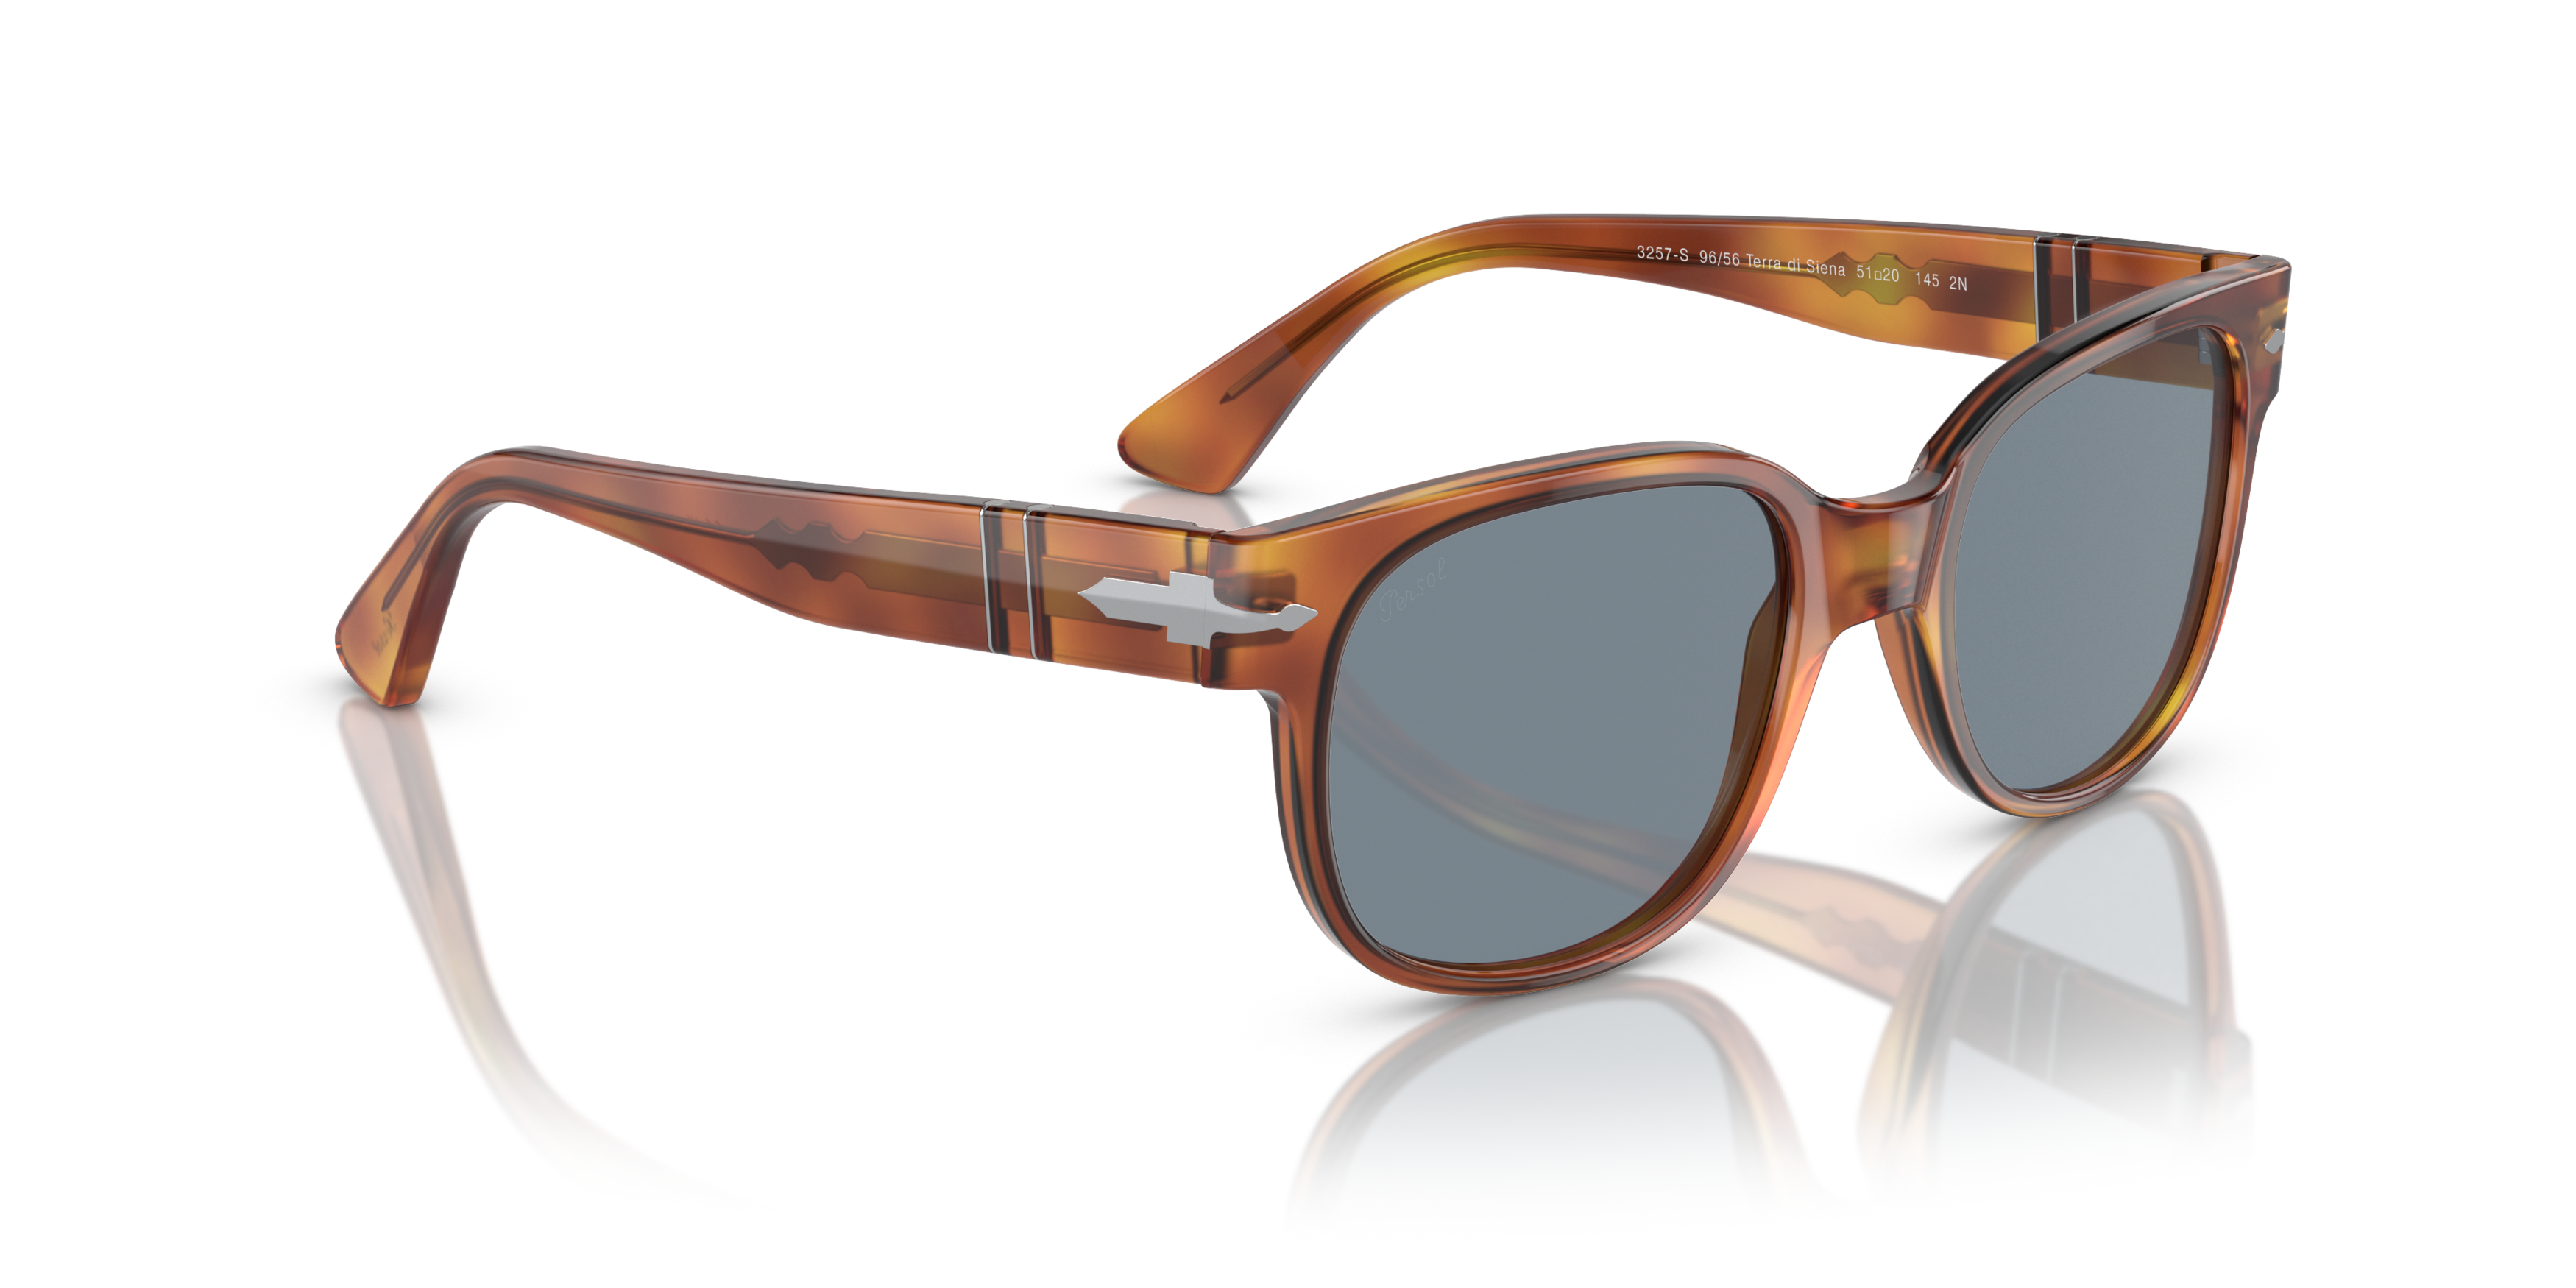 [products.image.angle_right01] Persol 0PO3257S 96/56